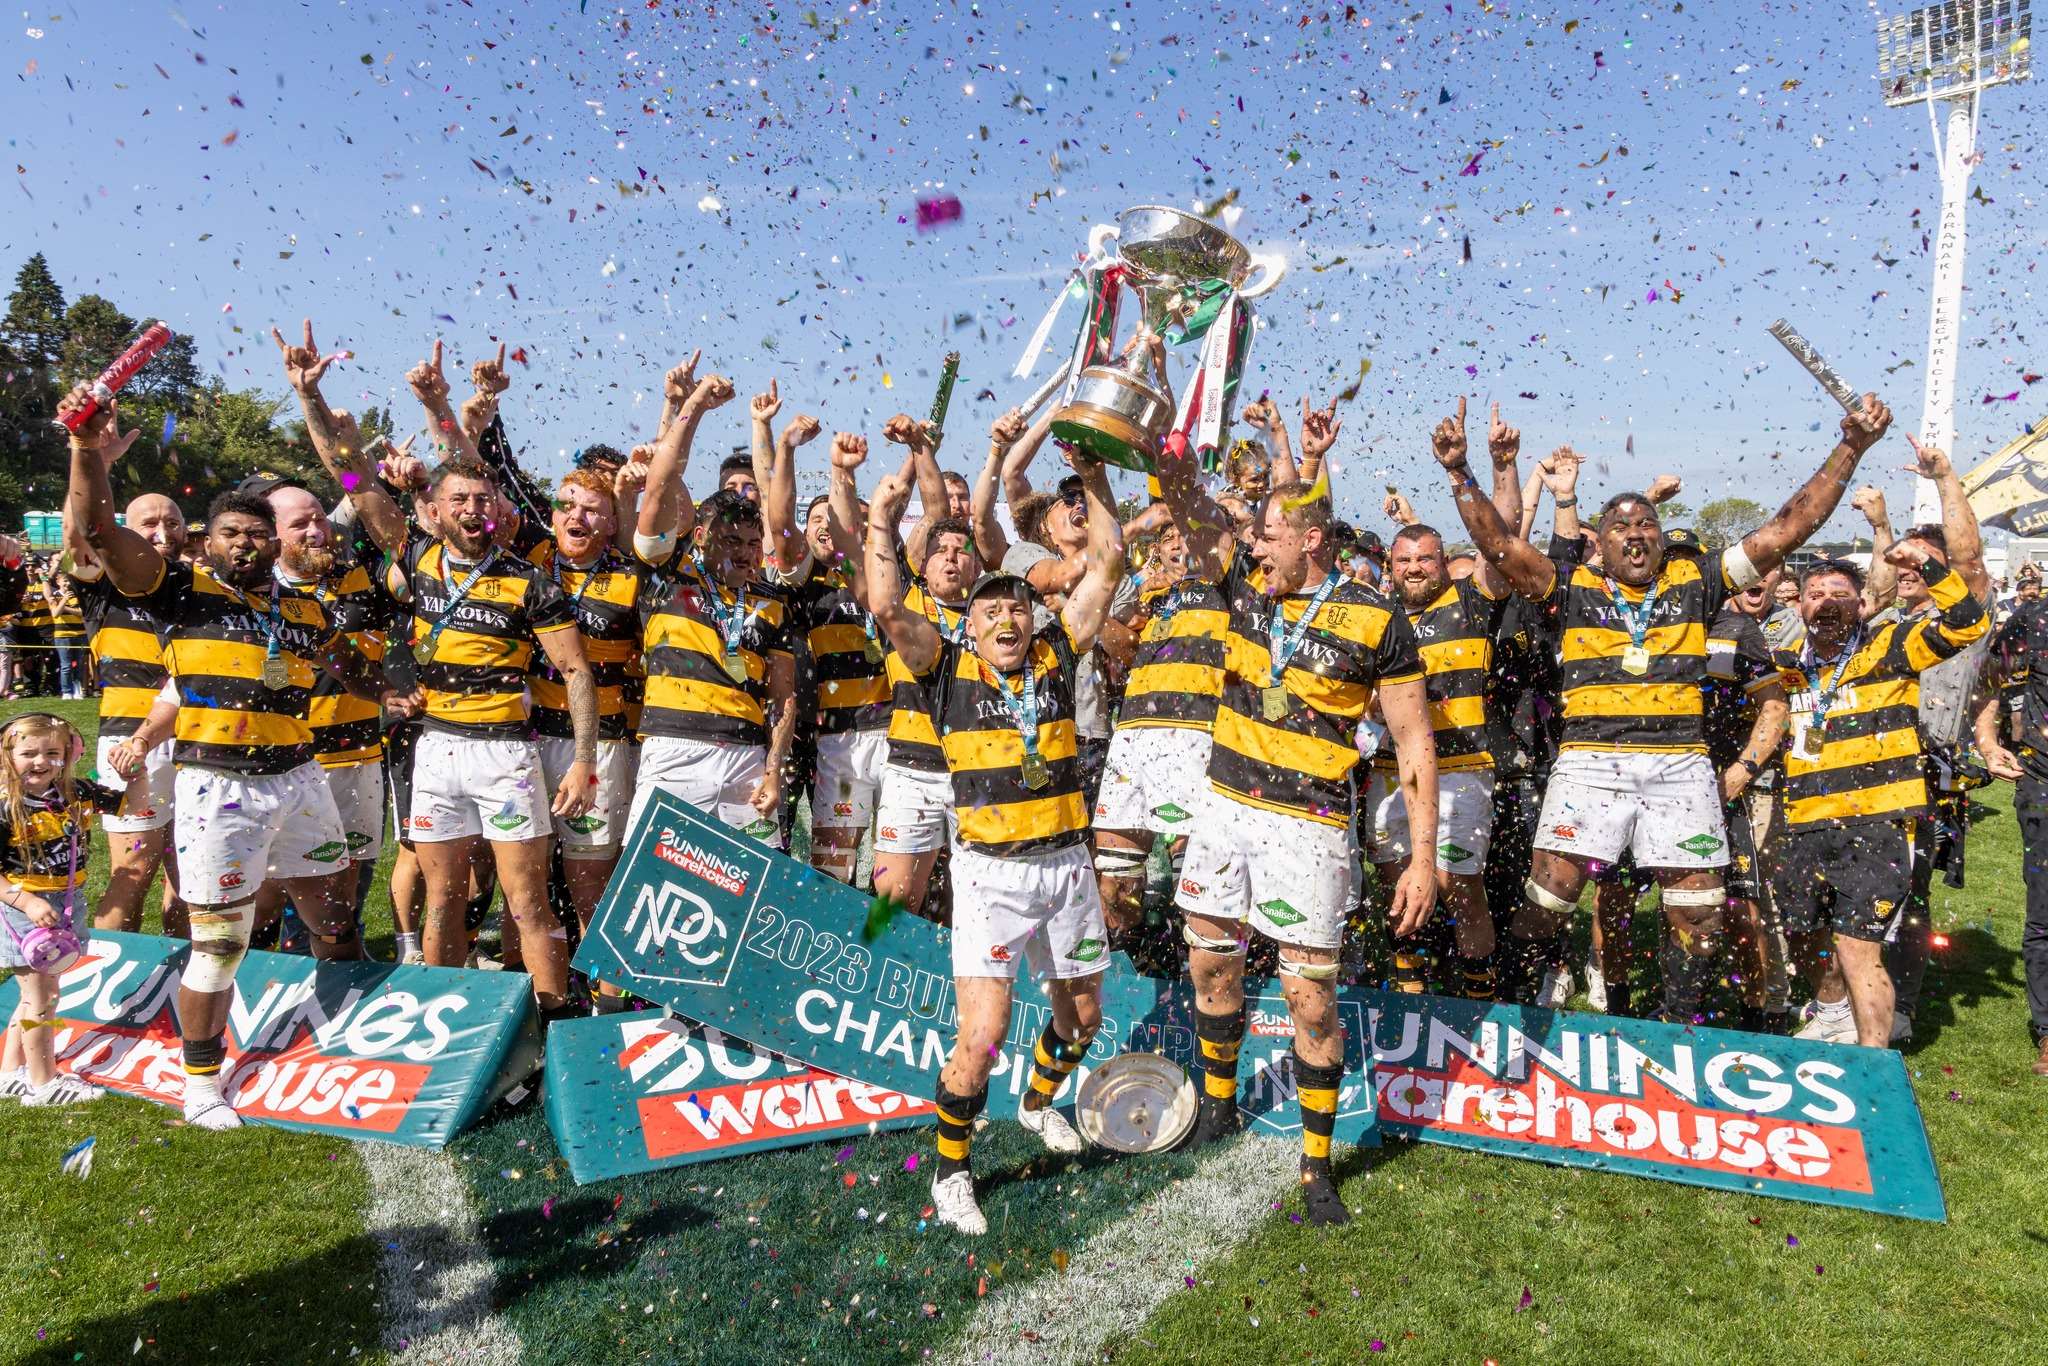 Rugby: Union posts surplus for second year running